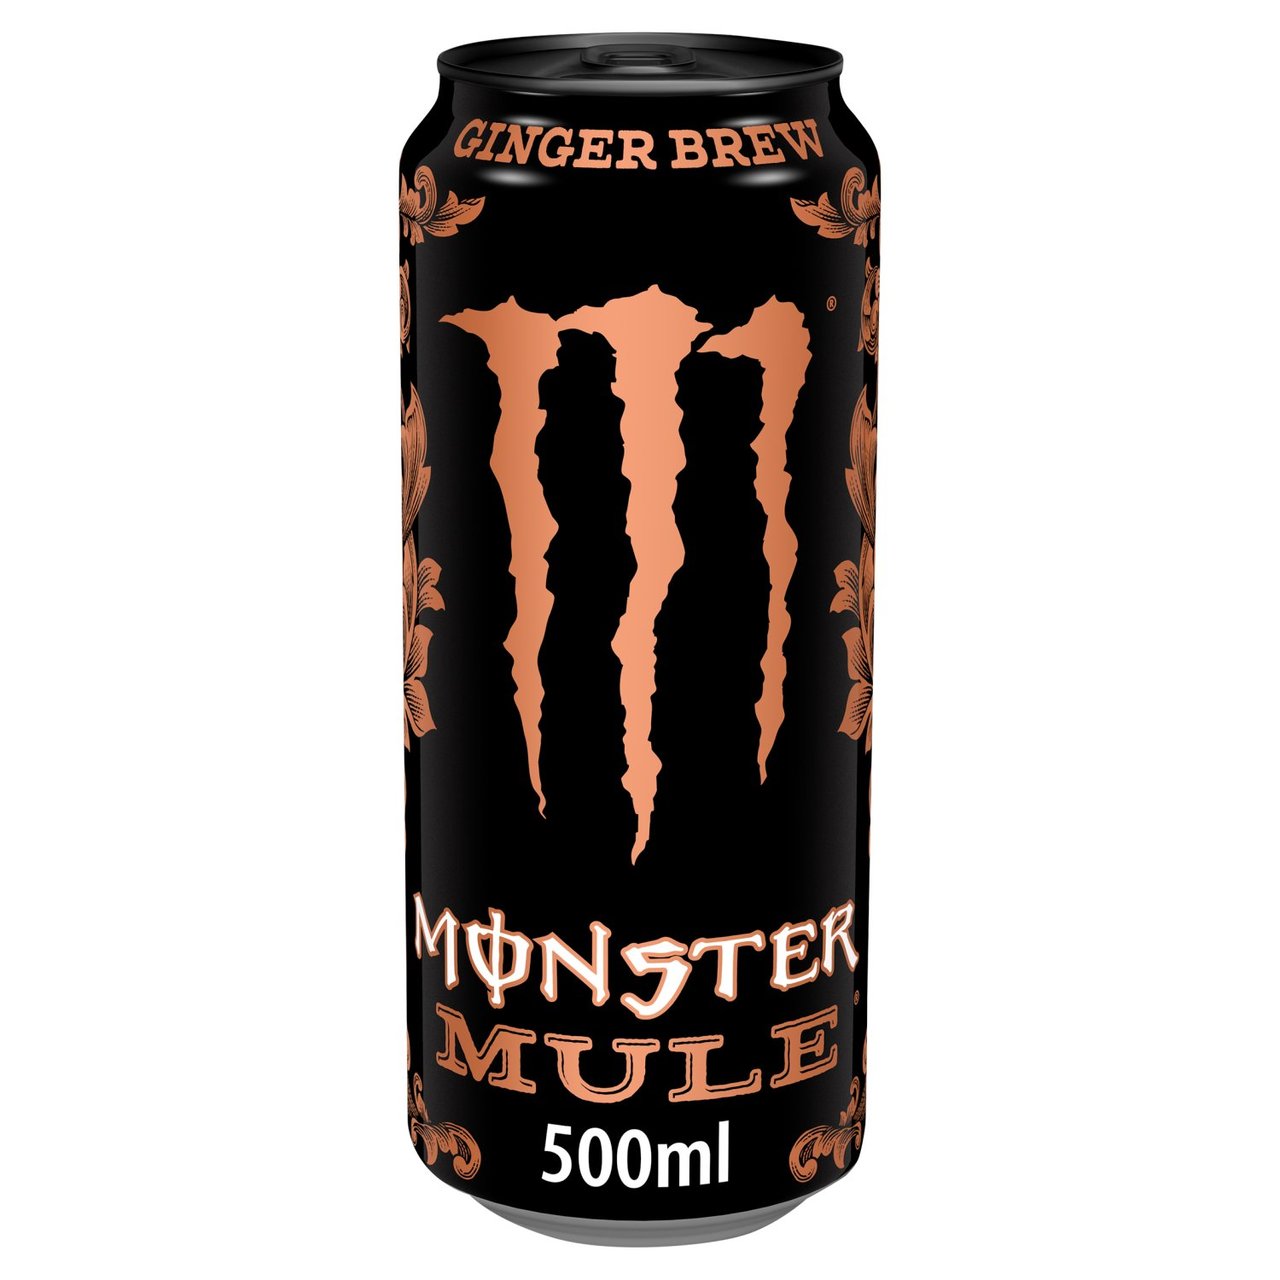 Monster Mule Ginger Brew Can PM £1.39 500ml